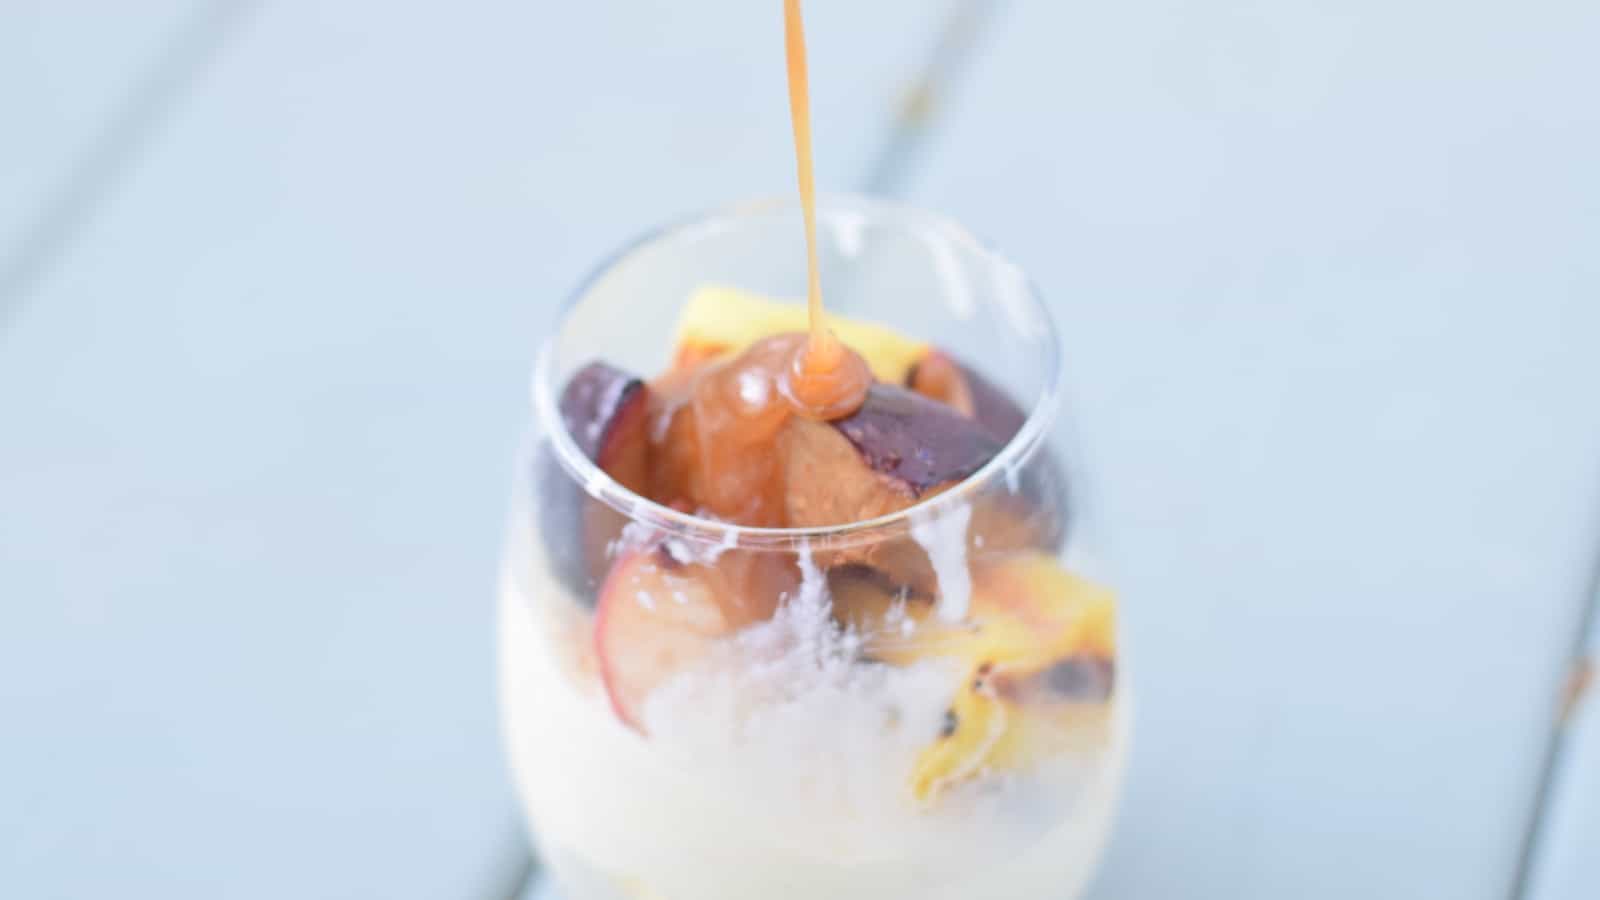 Image shows a glass with ice cream and grilled fruit having caramel drizzled into it.